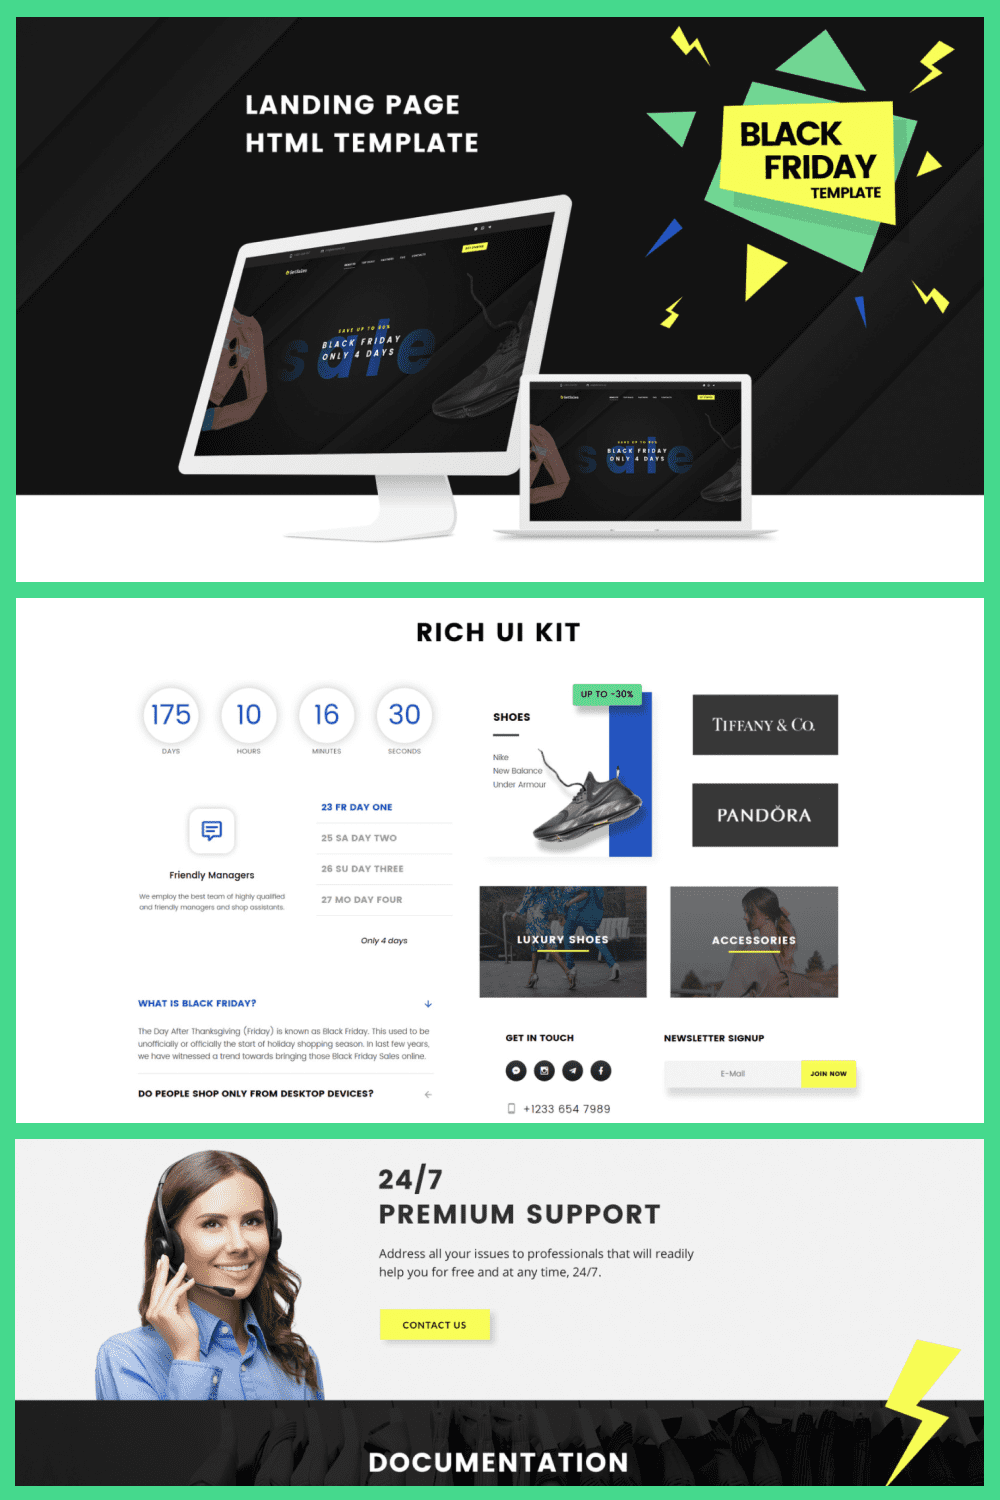 Black Friday Template with Dark Background and Thick Blue and White Letters.